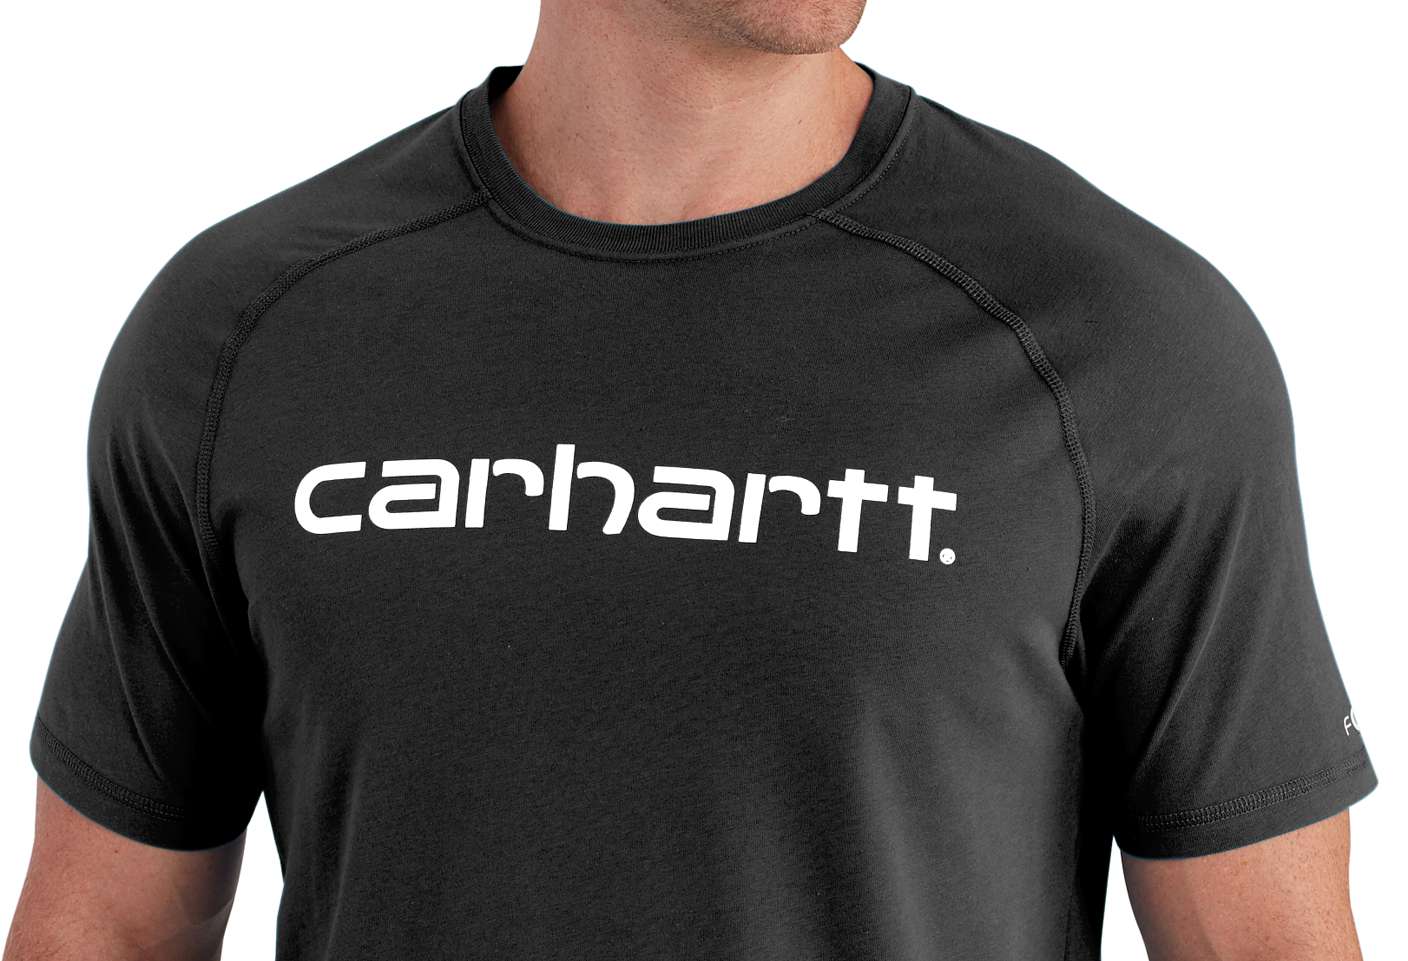 Carhartt graphics honor over 130 years of history